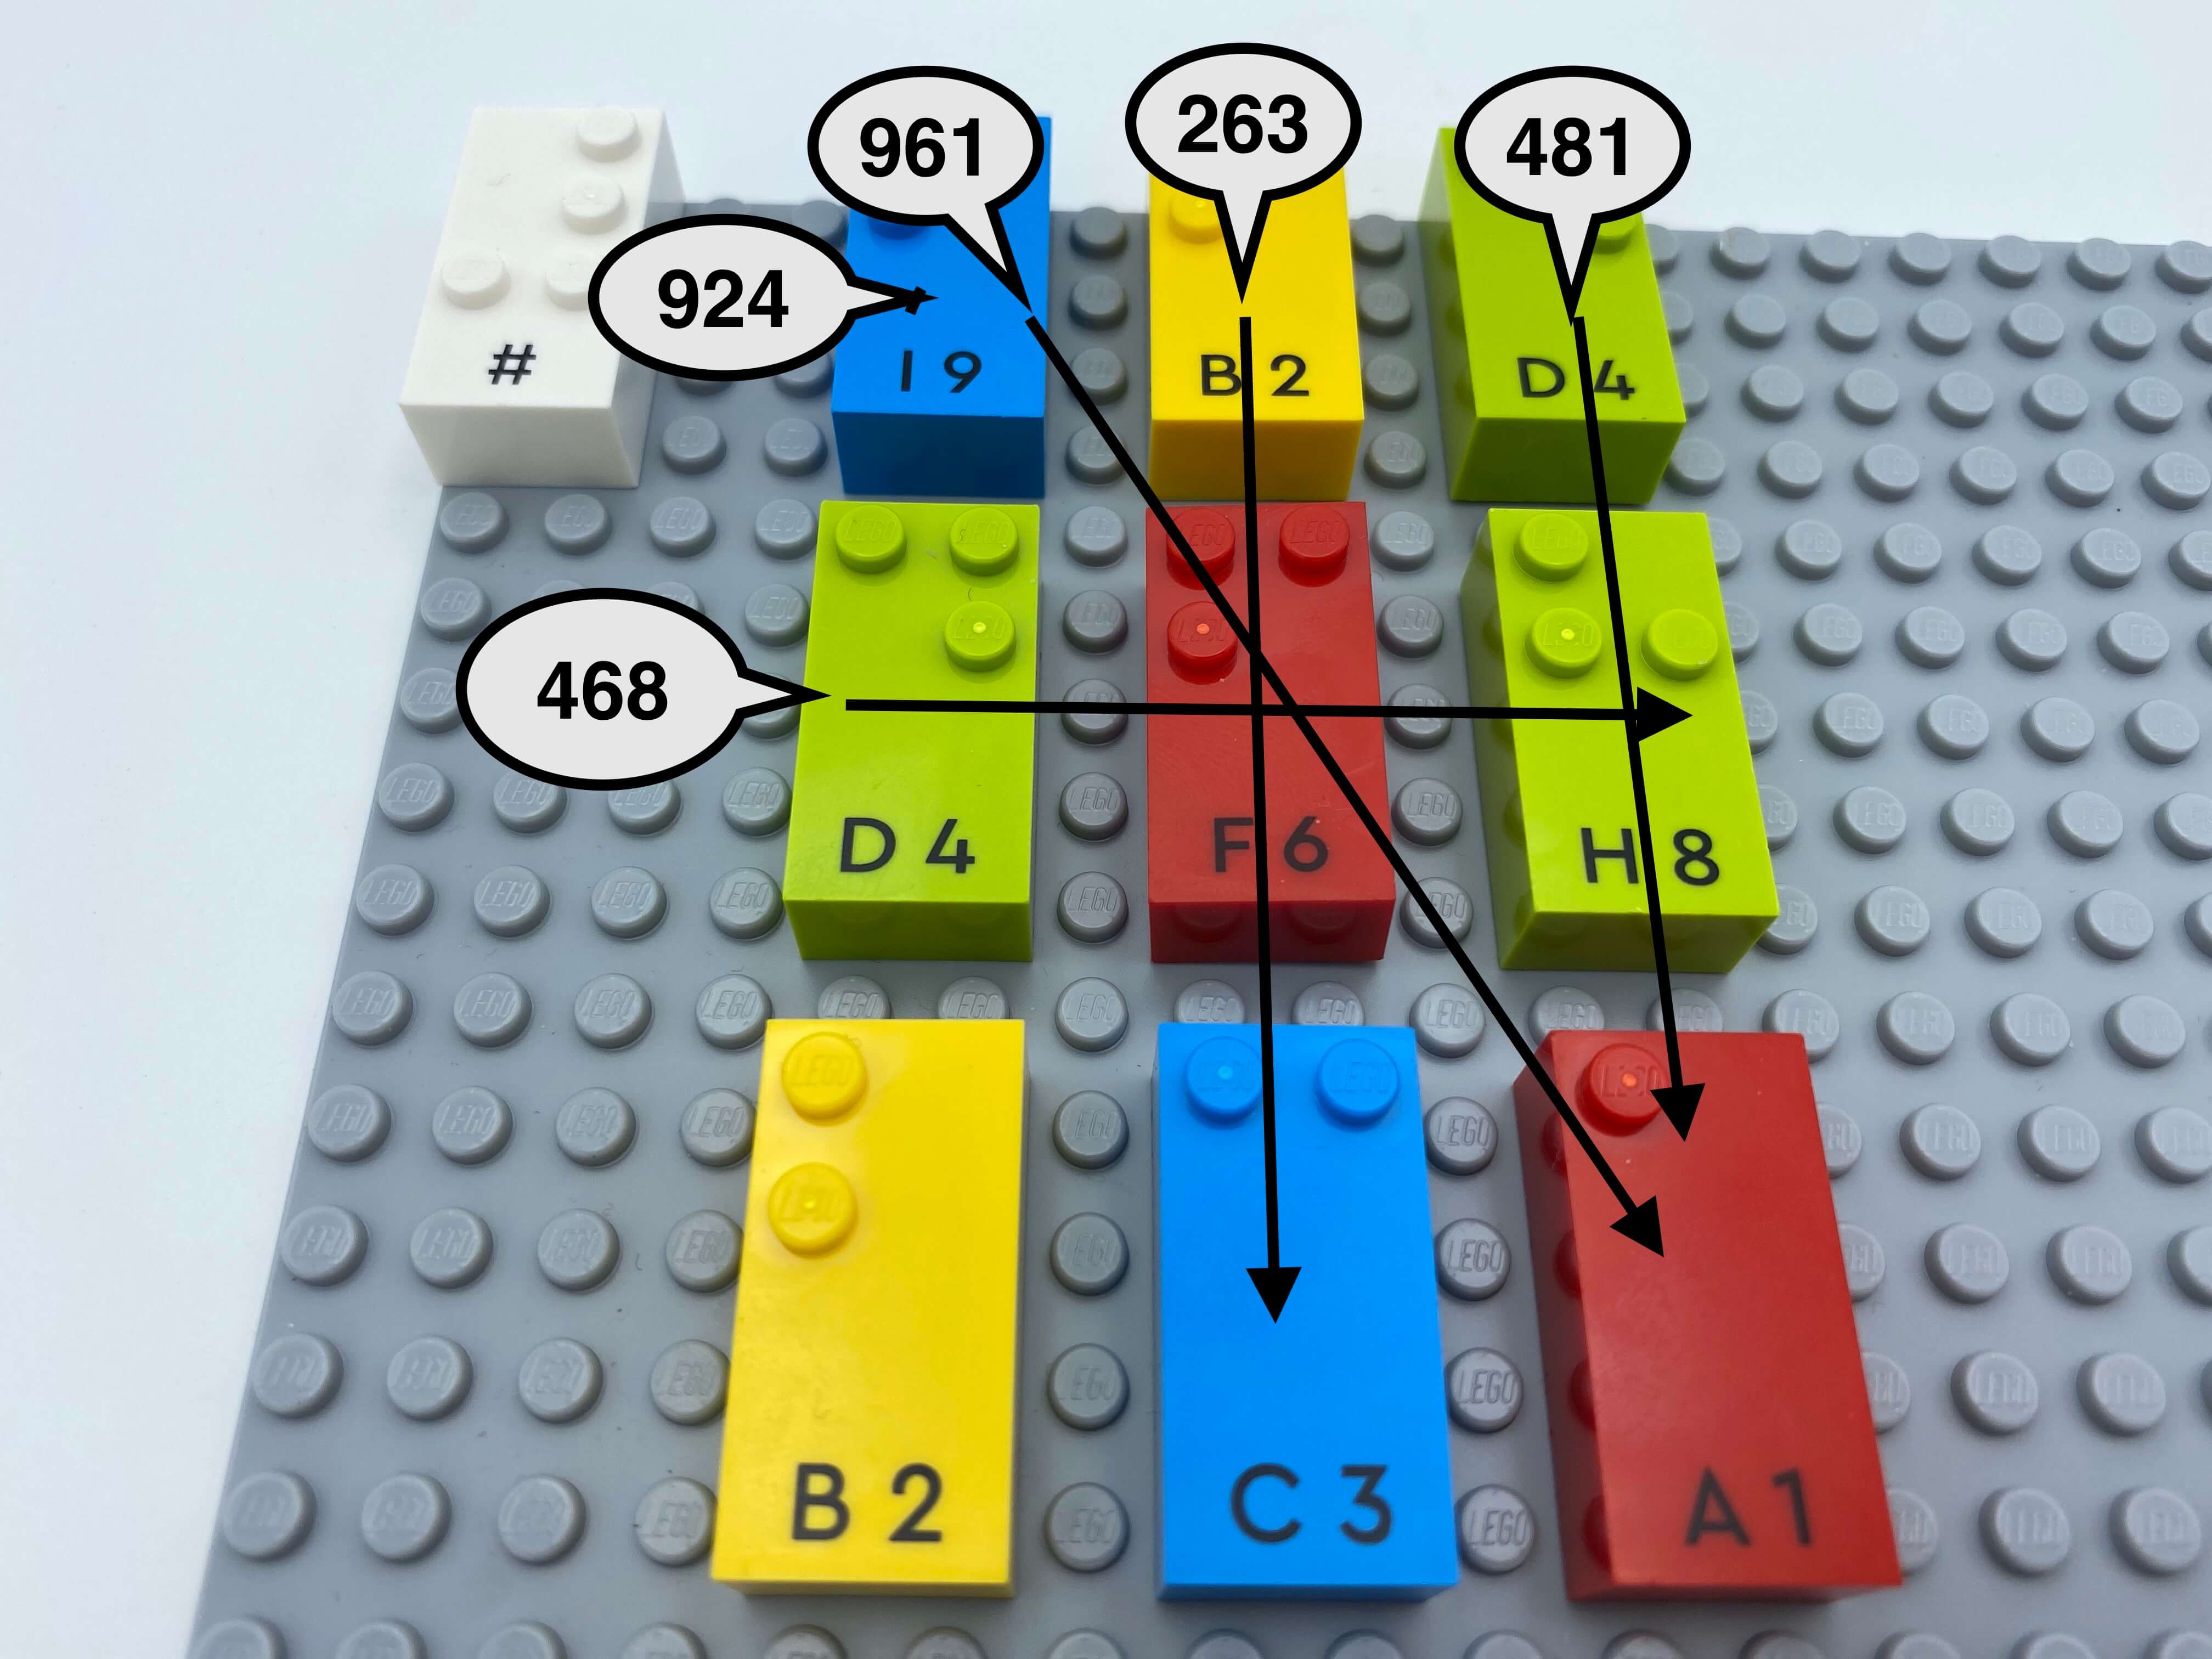 Number sign brick on the base plate, a rectangle of 9 number bricks. Arrows to show examples of numbers read: first horizontal row = 924, second = 468, first diagonal left to right ant top to bottom = 961, second vertical row = 263, third = 481.